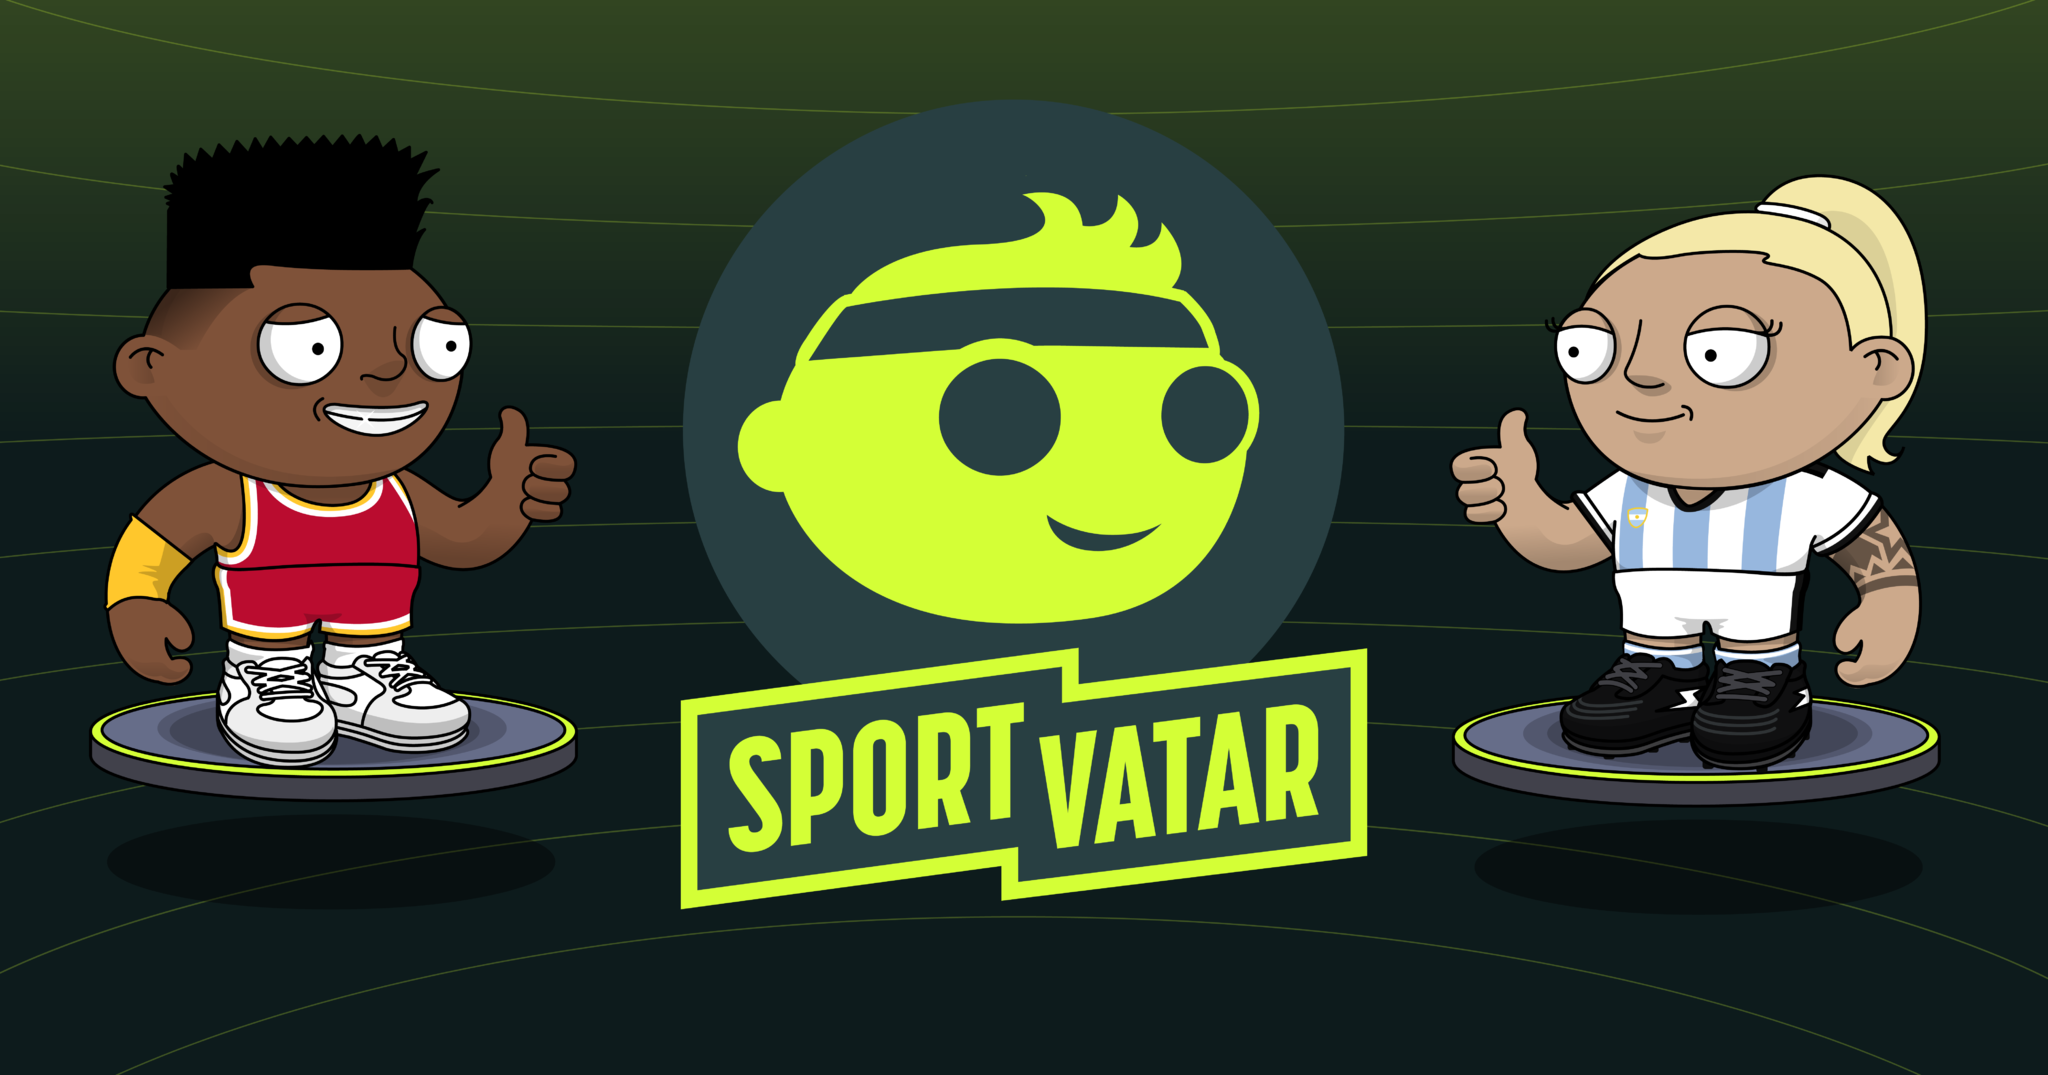 Sportvatar arrives for users all across the world